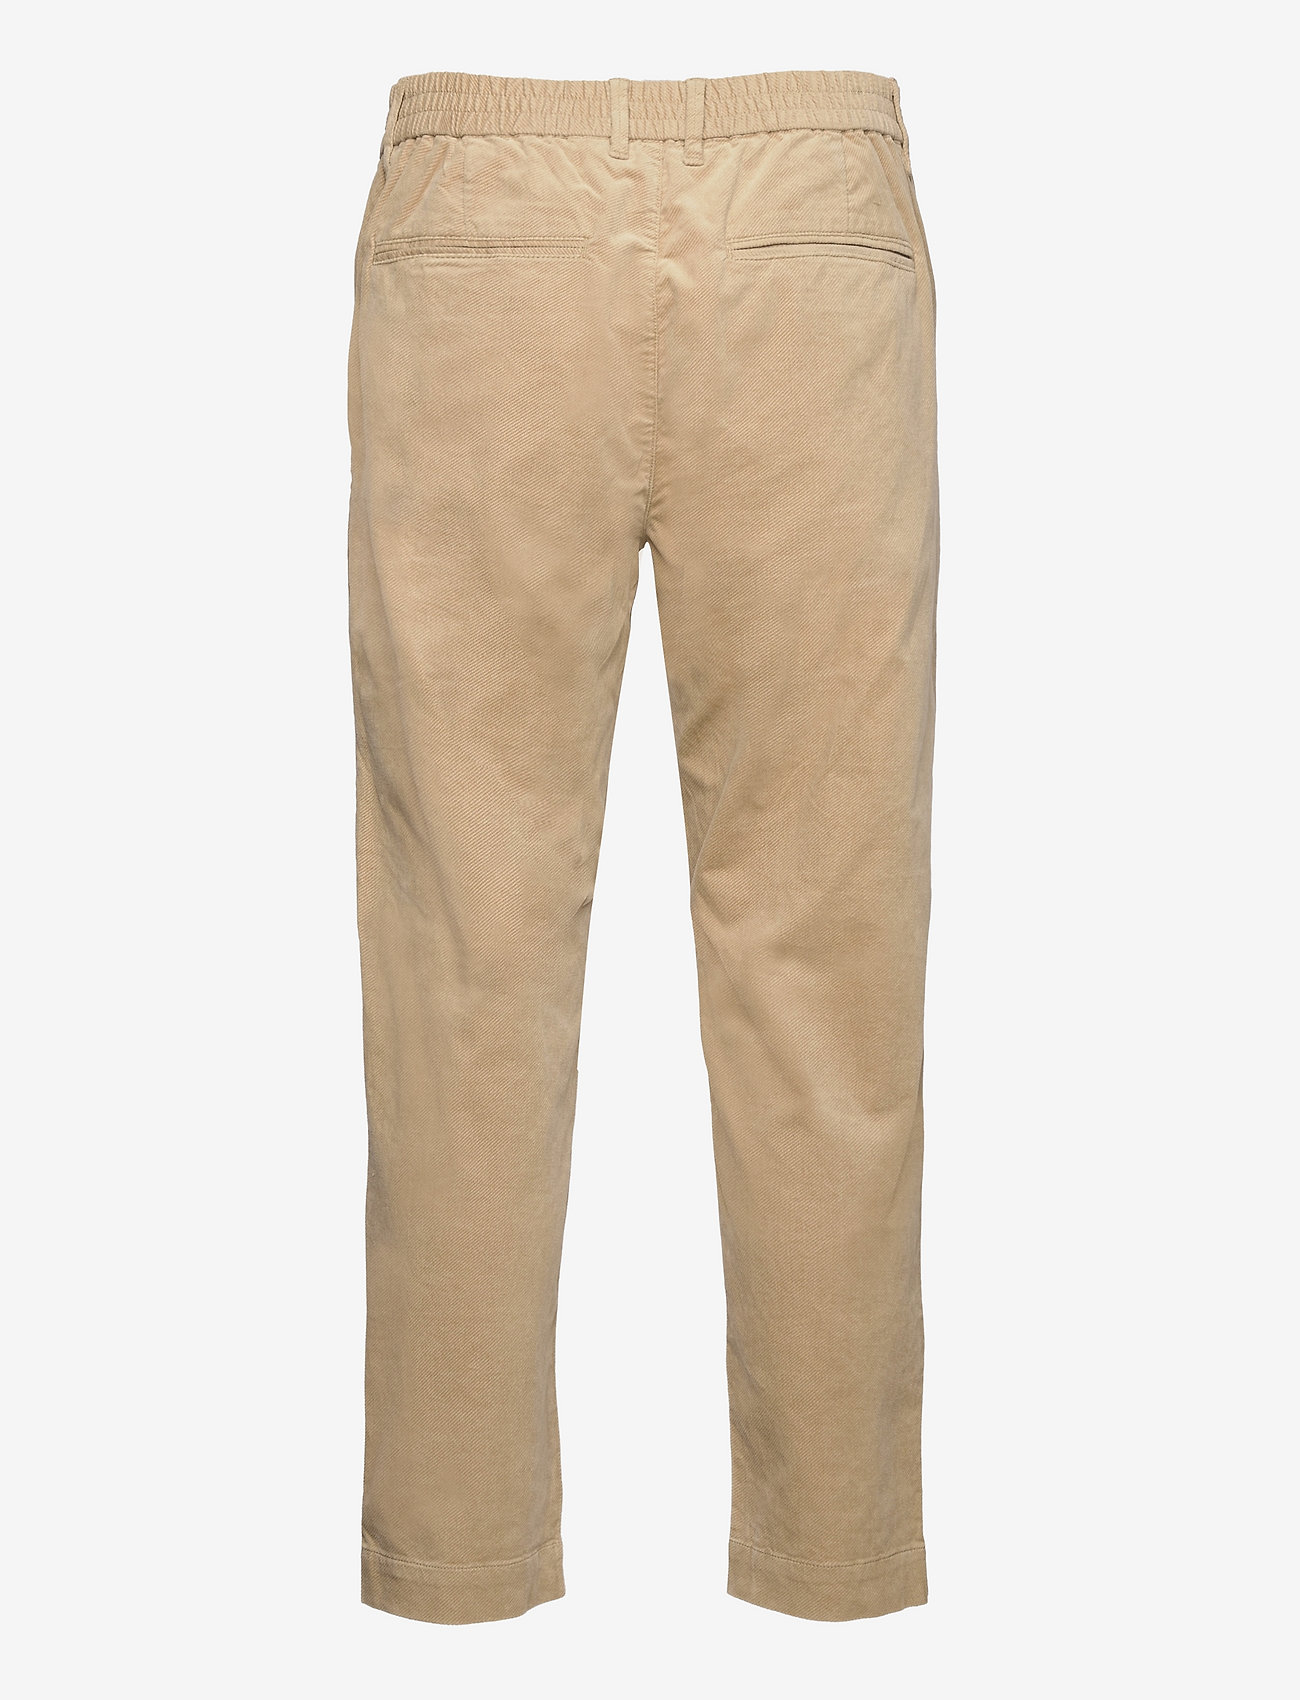 Esprit Collection - Men Pants woven cropped - chino püksid - beige - 1